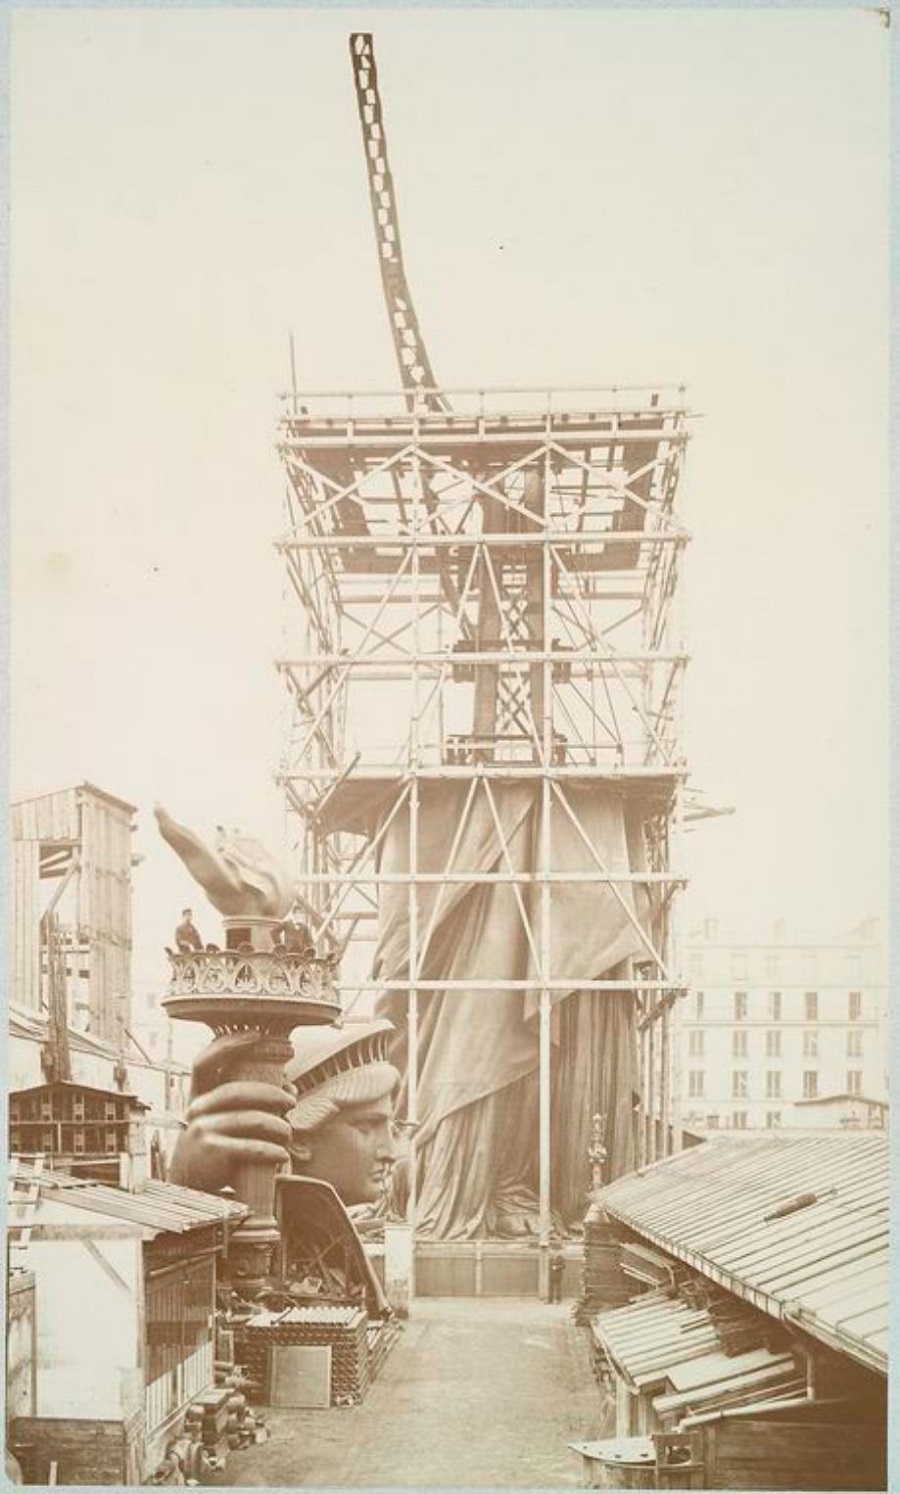 The Statue of Liberty reached new heights in 1885.